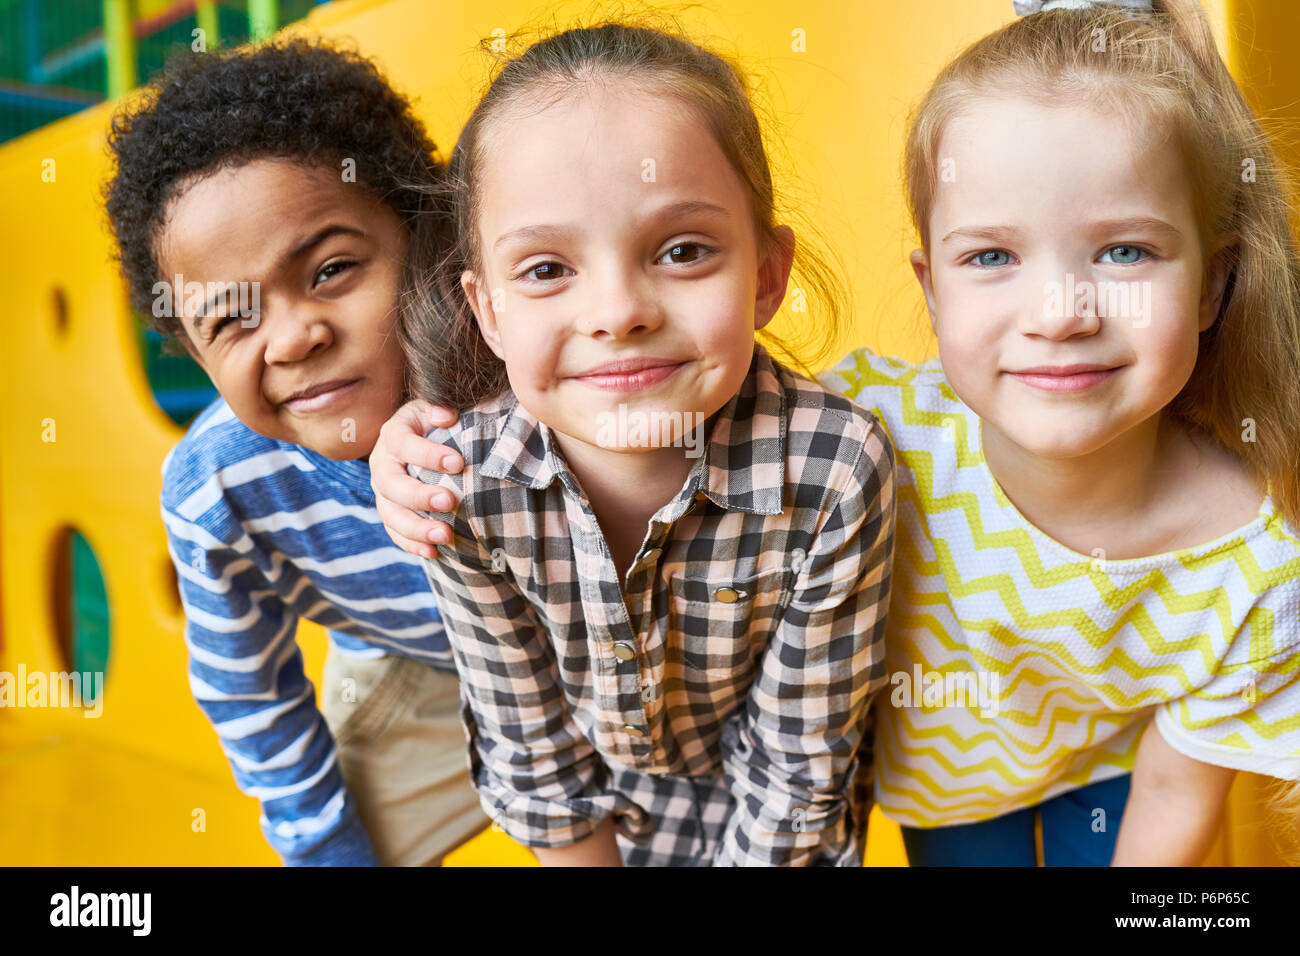 Happy Children Looking at Camera in Play Center Stock Photo